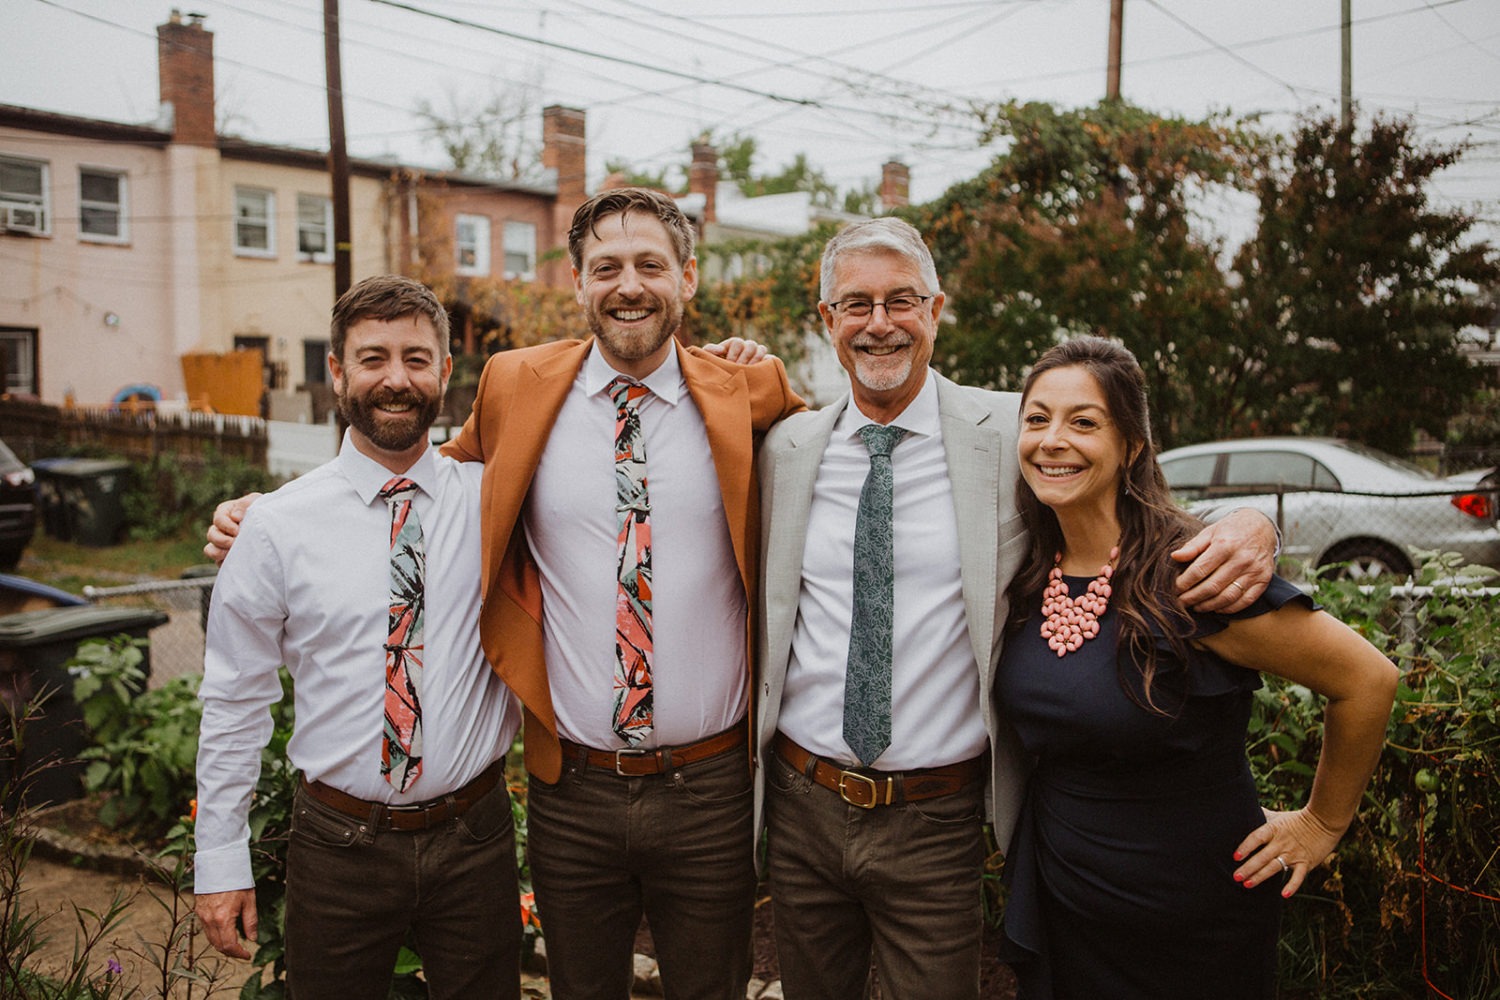 groom stands with family wearing matching ties on wedding day